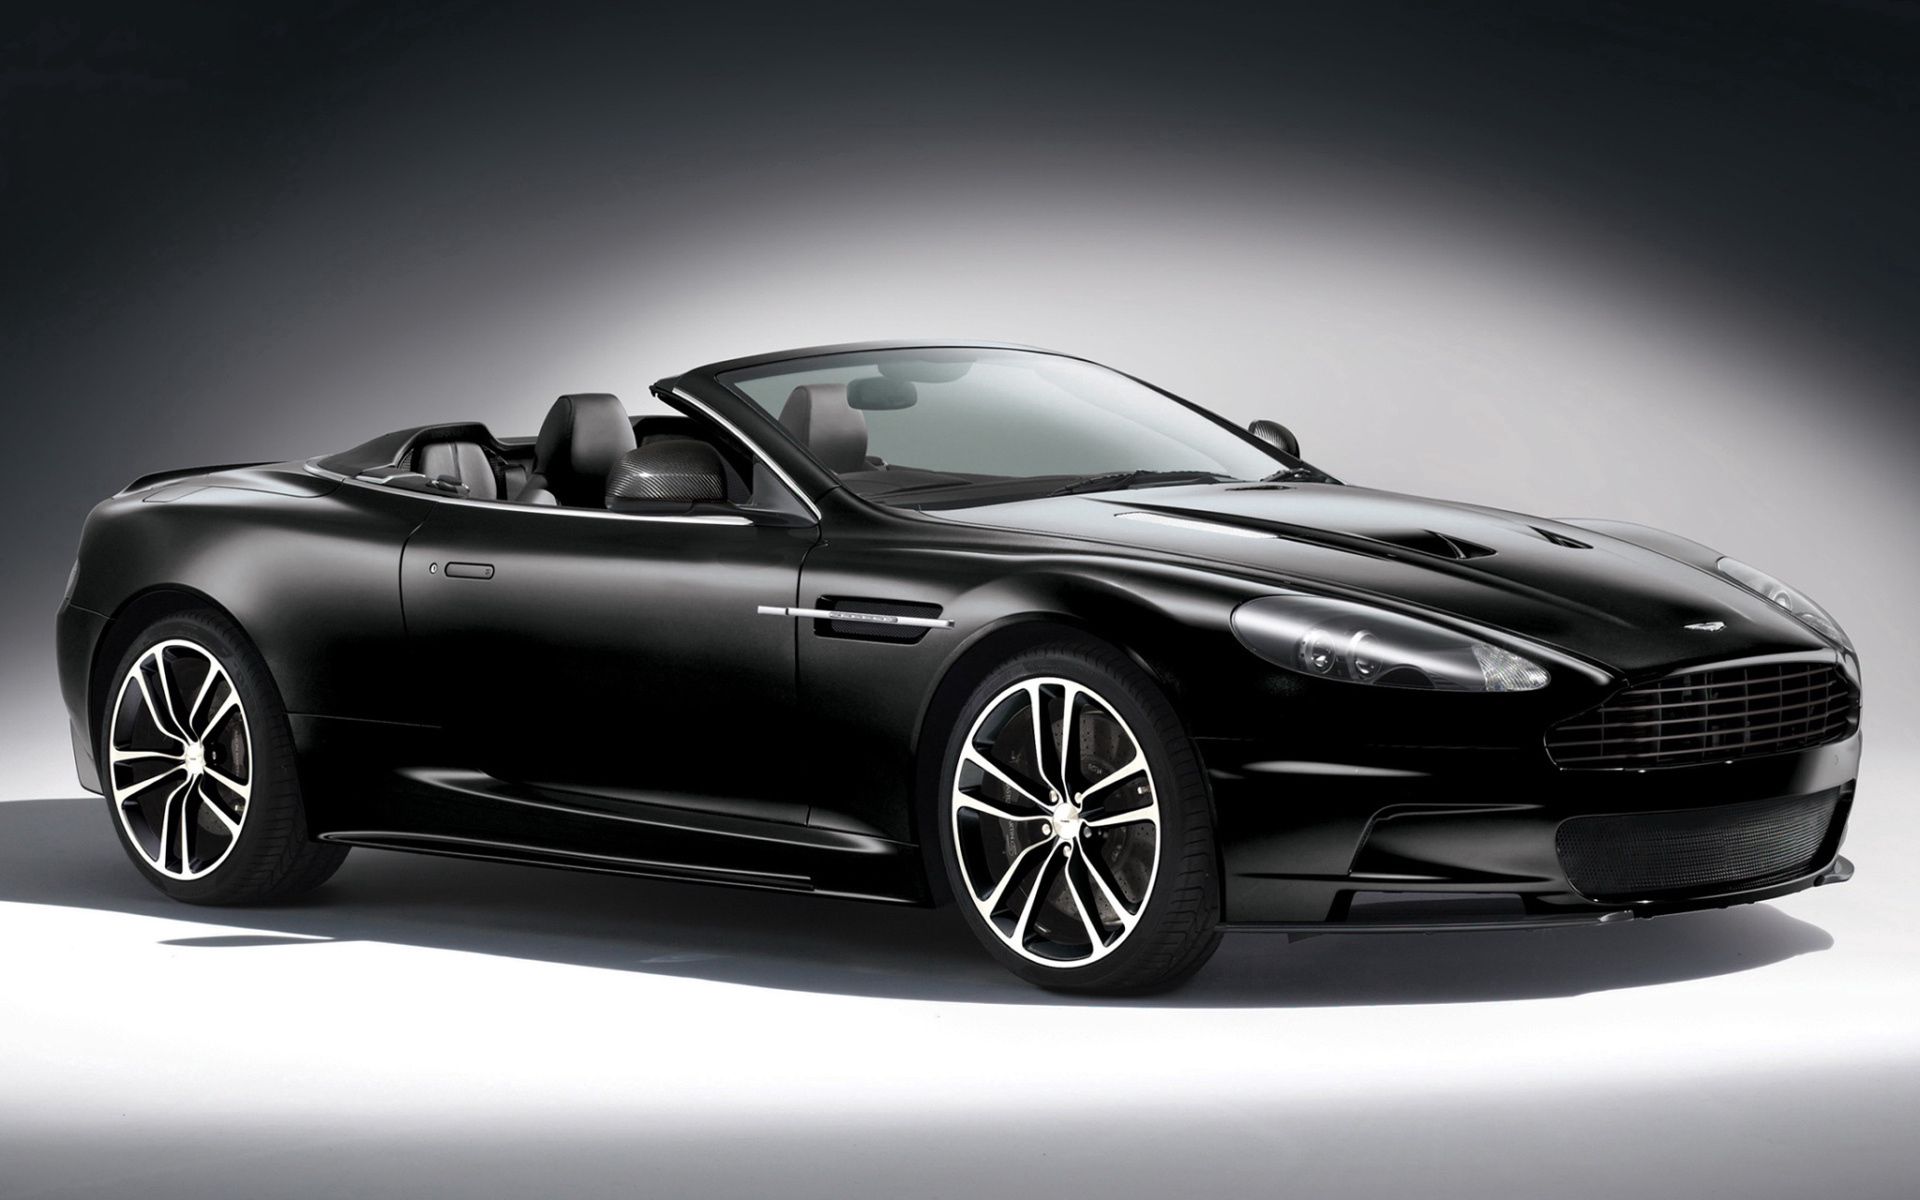 side view, black, aston martin, cars, cabriolet, dbs, carbon edition 2160p